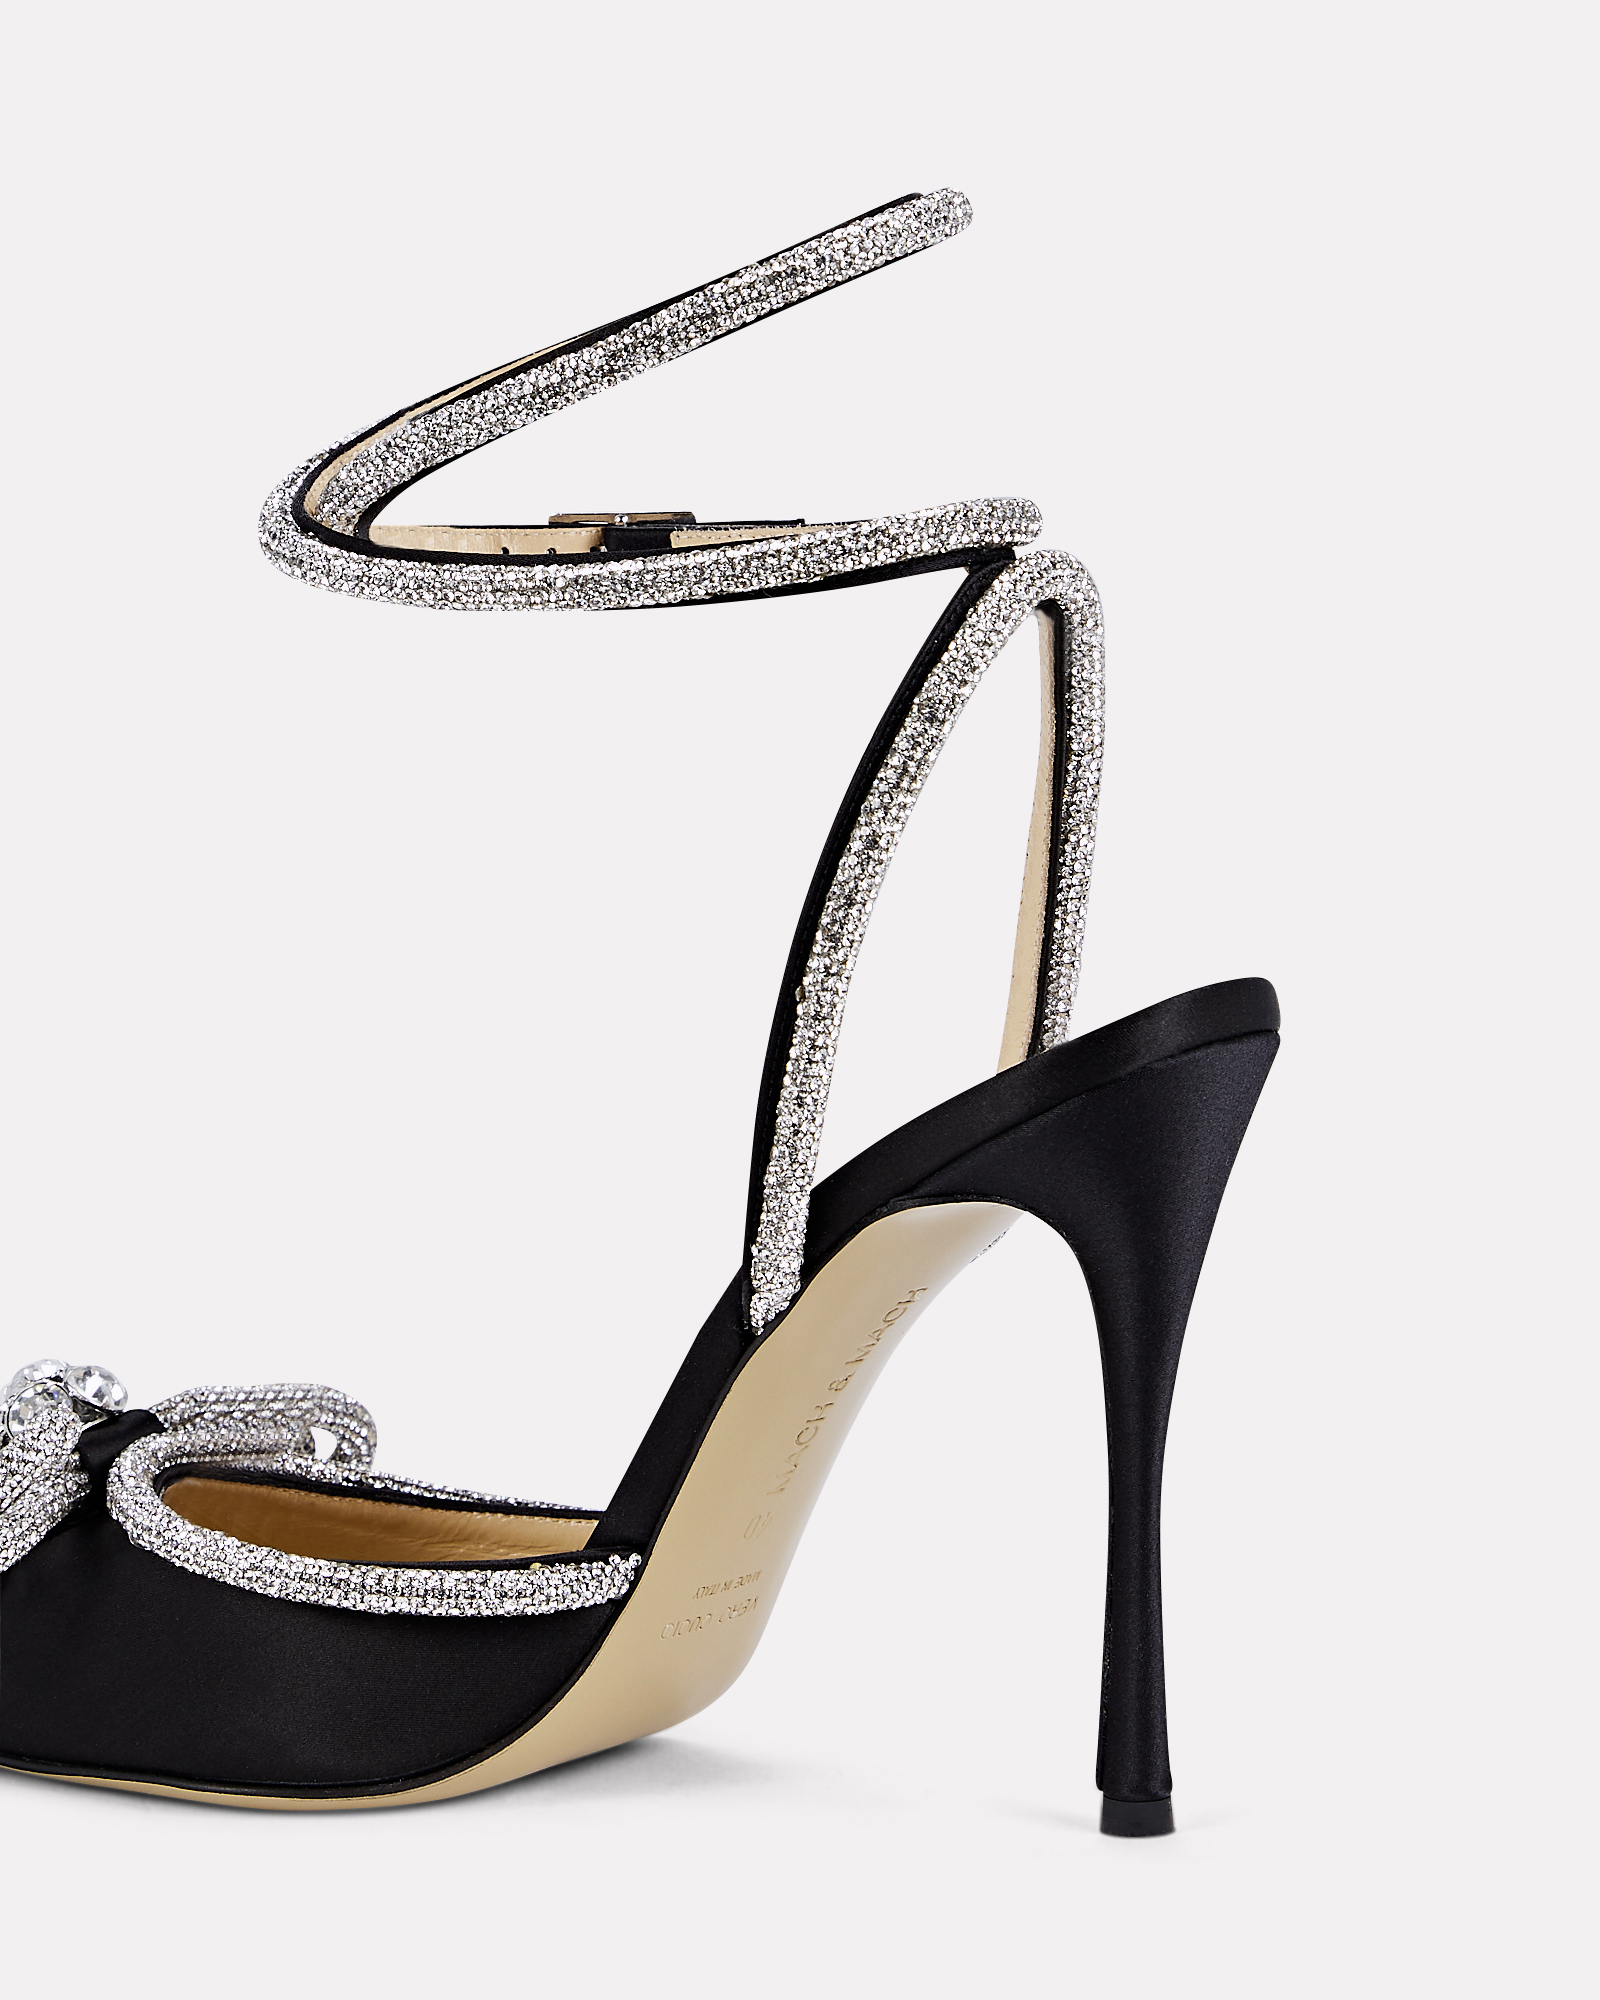 MACH & MACH Double Bow Crystal-Embellished Satin Pumps | INTERMIX®